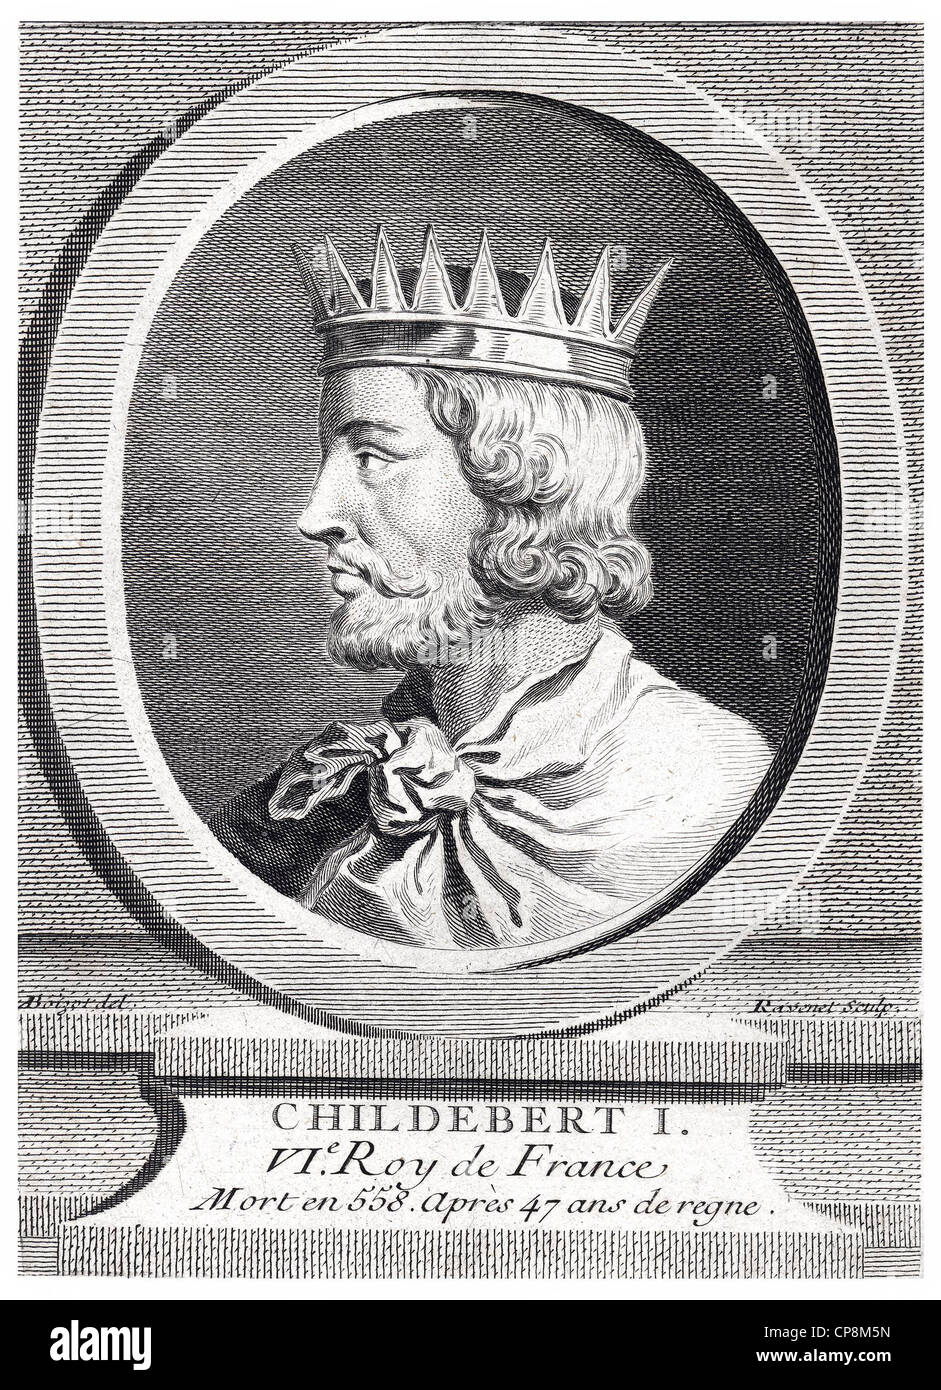 Childebert I, the Merovingian Frankish king with royal residence in Paris, 6th Century, Historic steel engraving from the 19th c Stock Photo